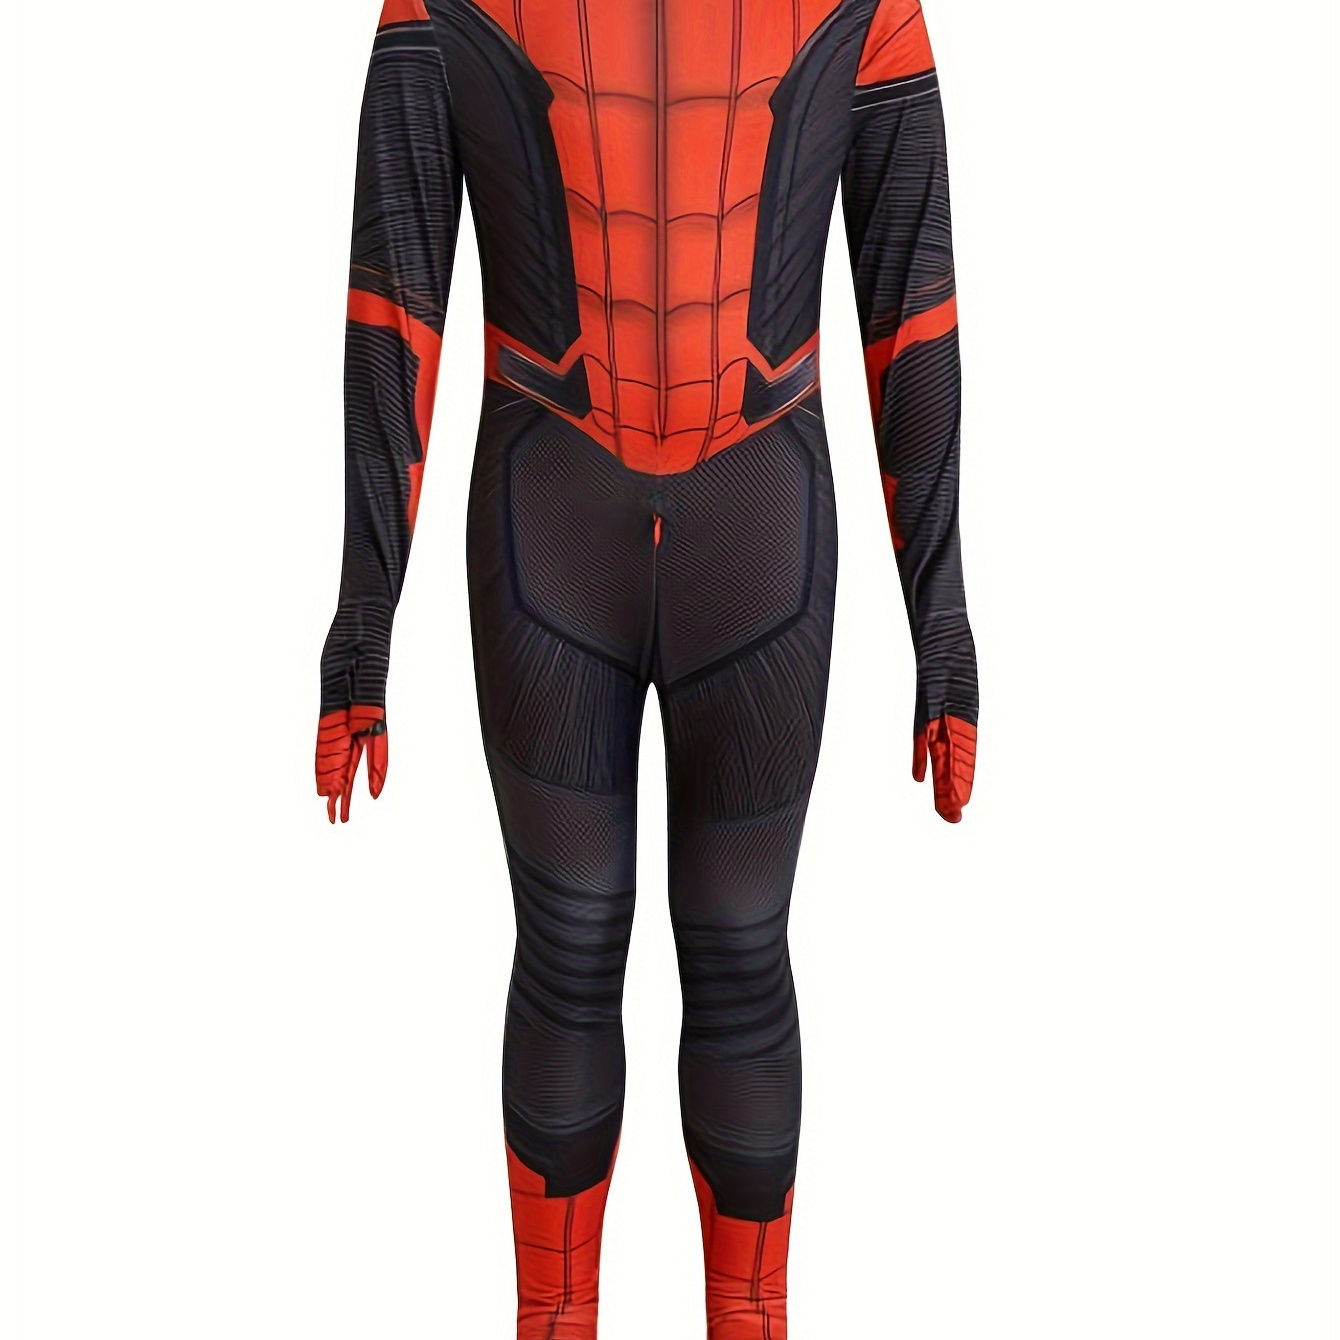 

Boys Halloween Spider Print Bodysuit, Movie Character Halloween Party Outfit, Full Body Suit With Stretch Fabric